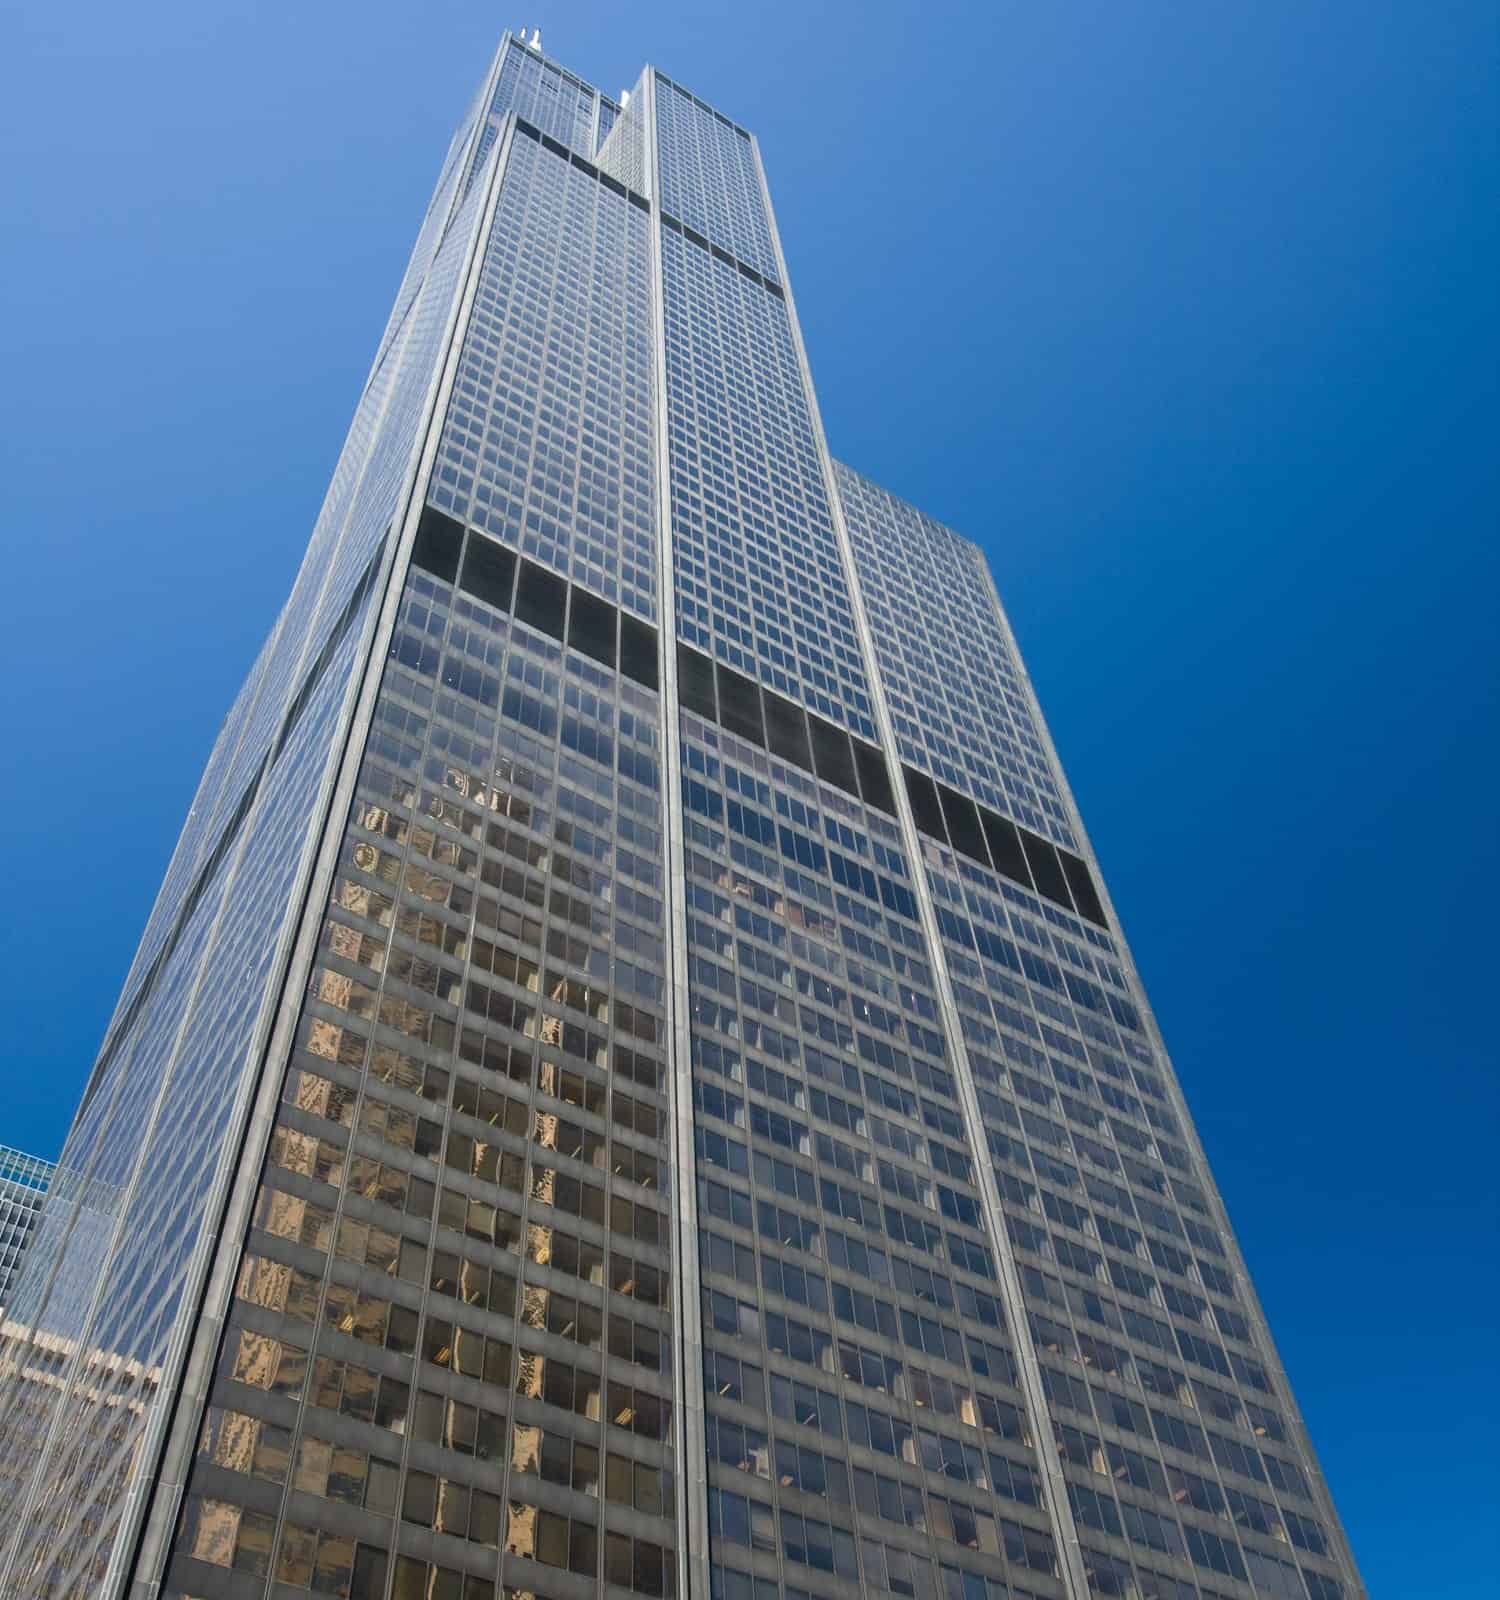 Sears Tower, Chicago, Illinois (Willis Tower)